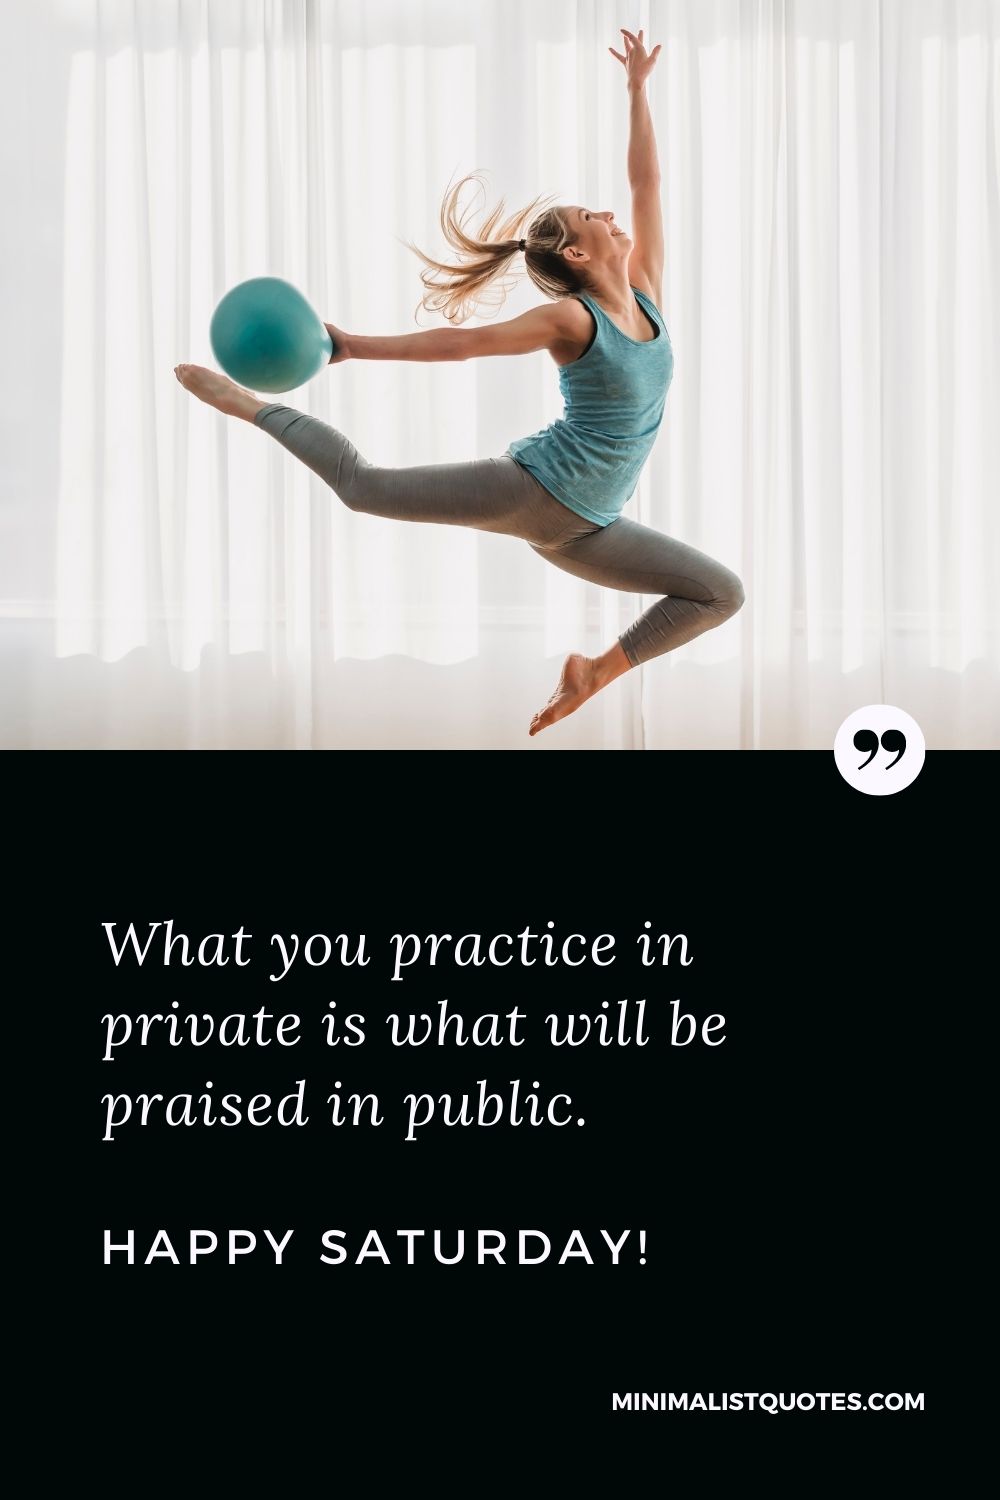 What you practice in private is what will be praised in public. Happy Saturday!